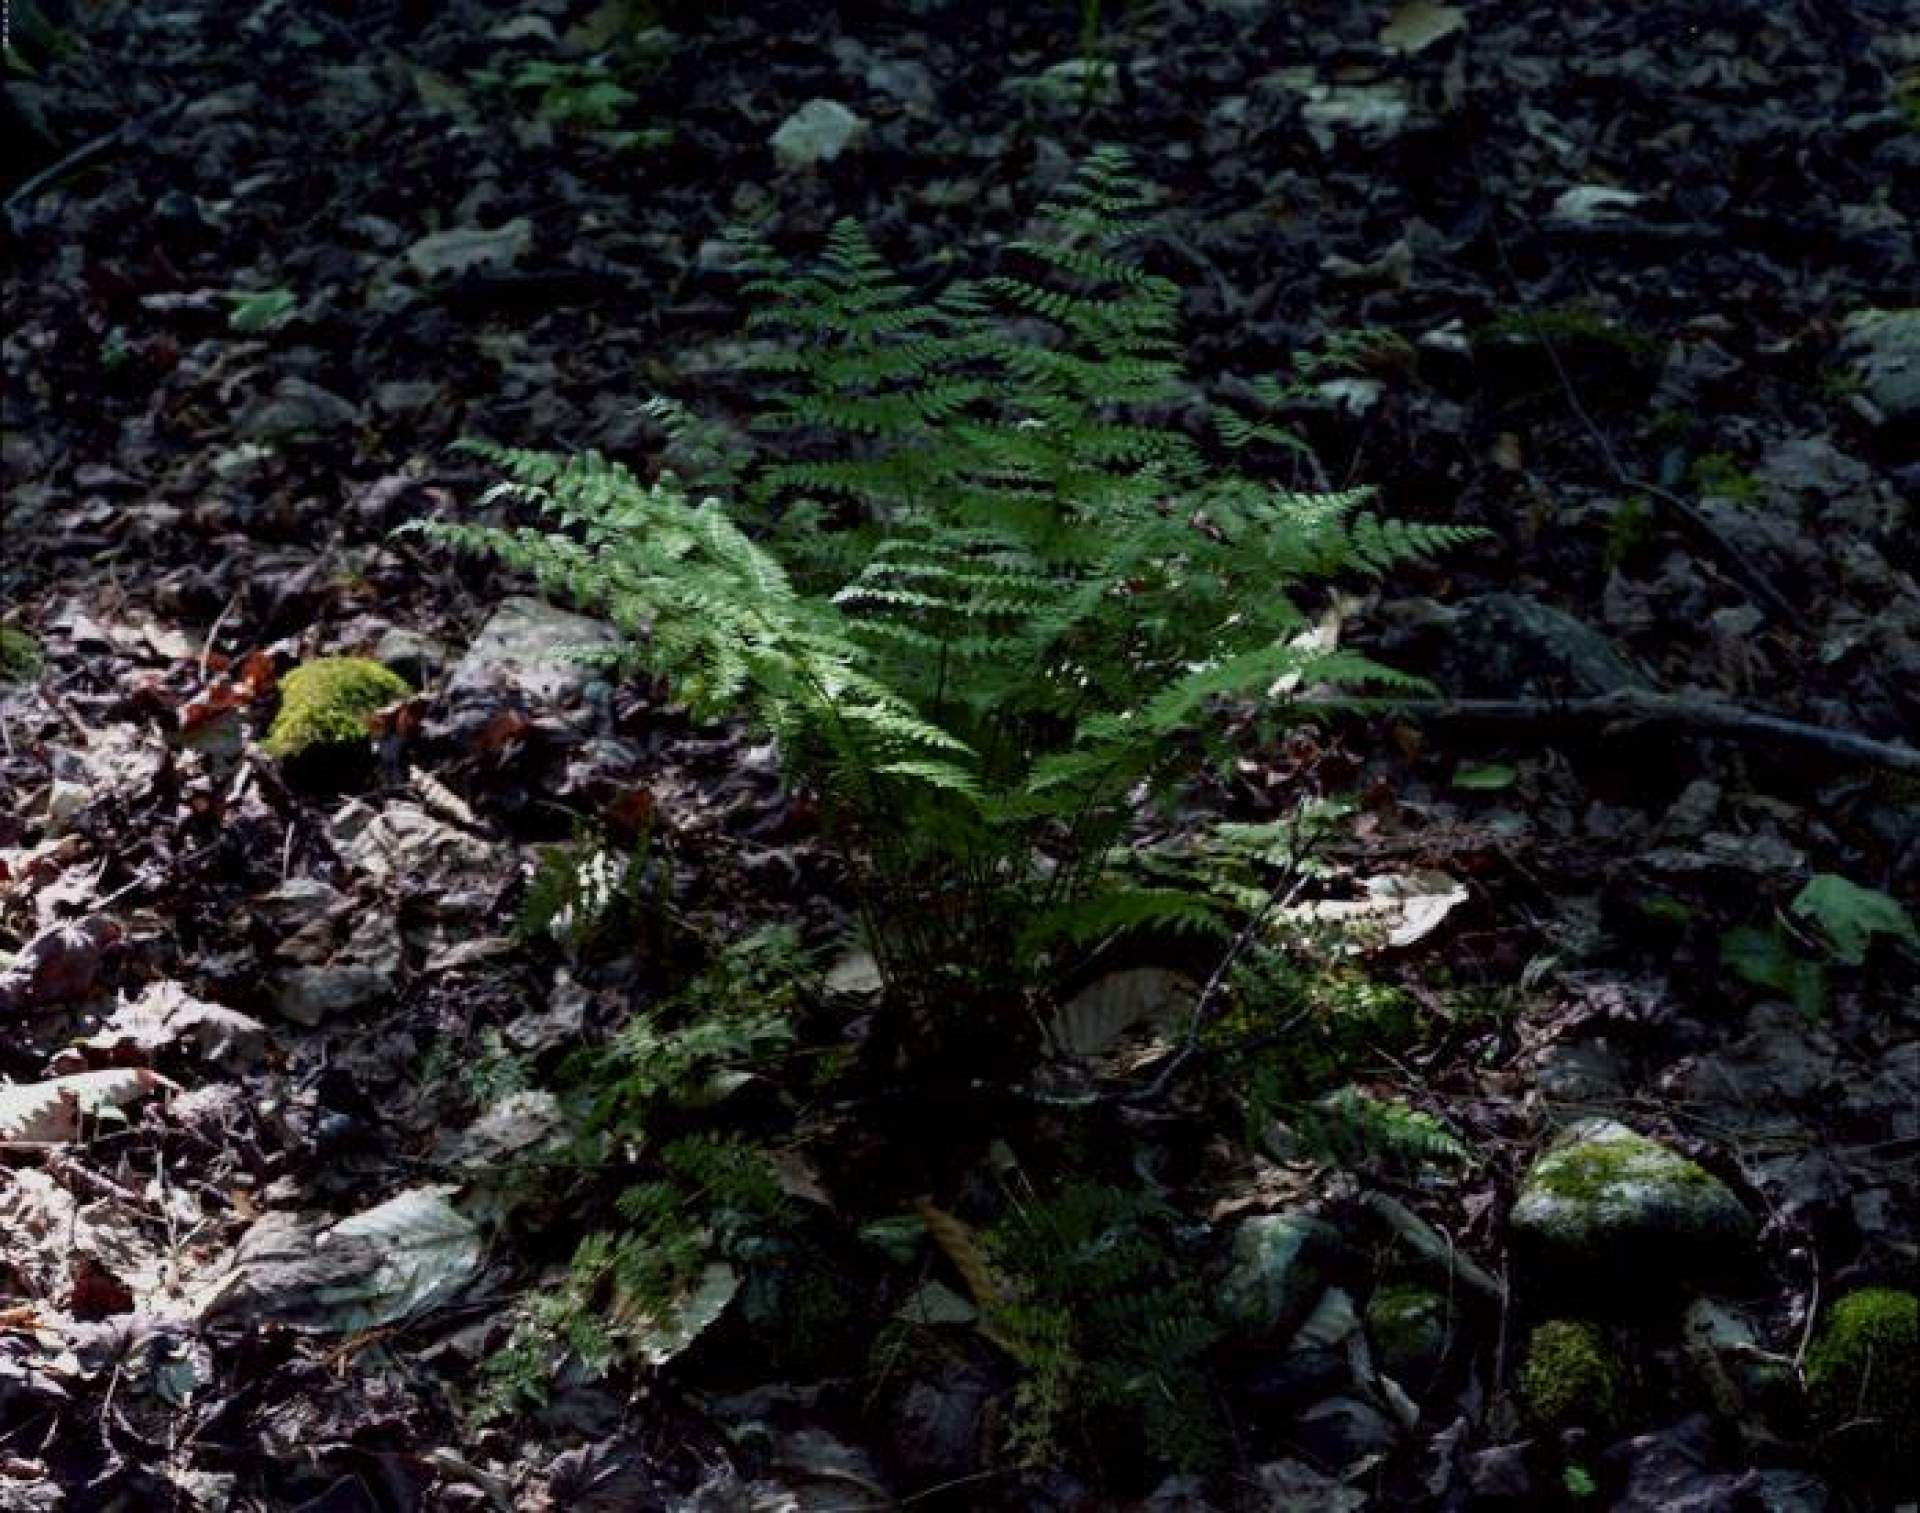 [Janelle Lynch, From the Catskill Mountains, ferns]